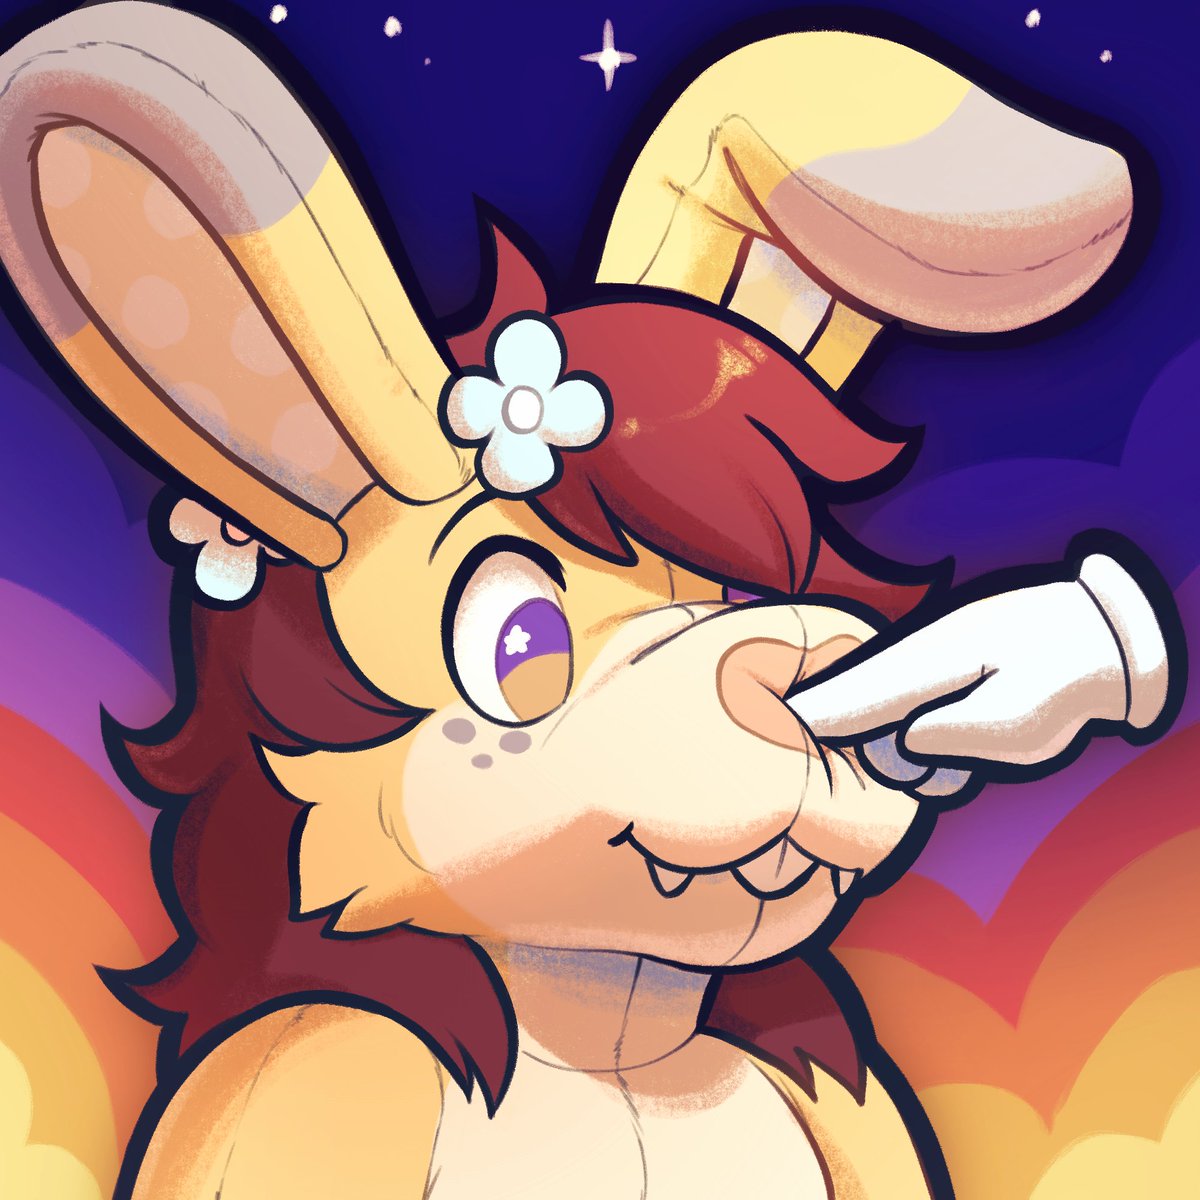 hey look at this plushie icon @frengers did :3